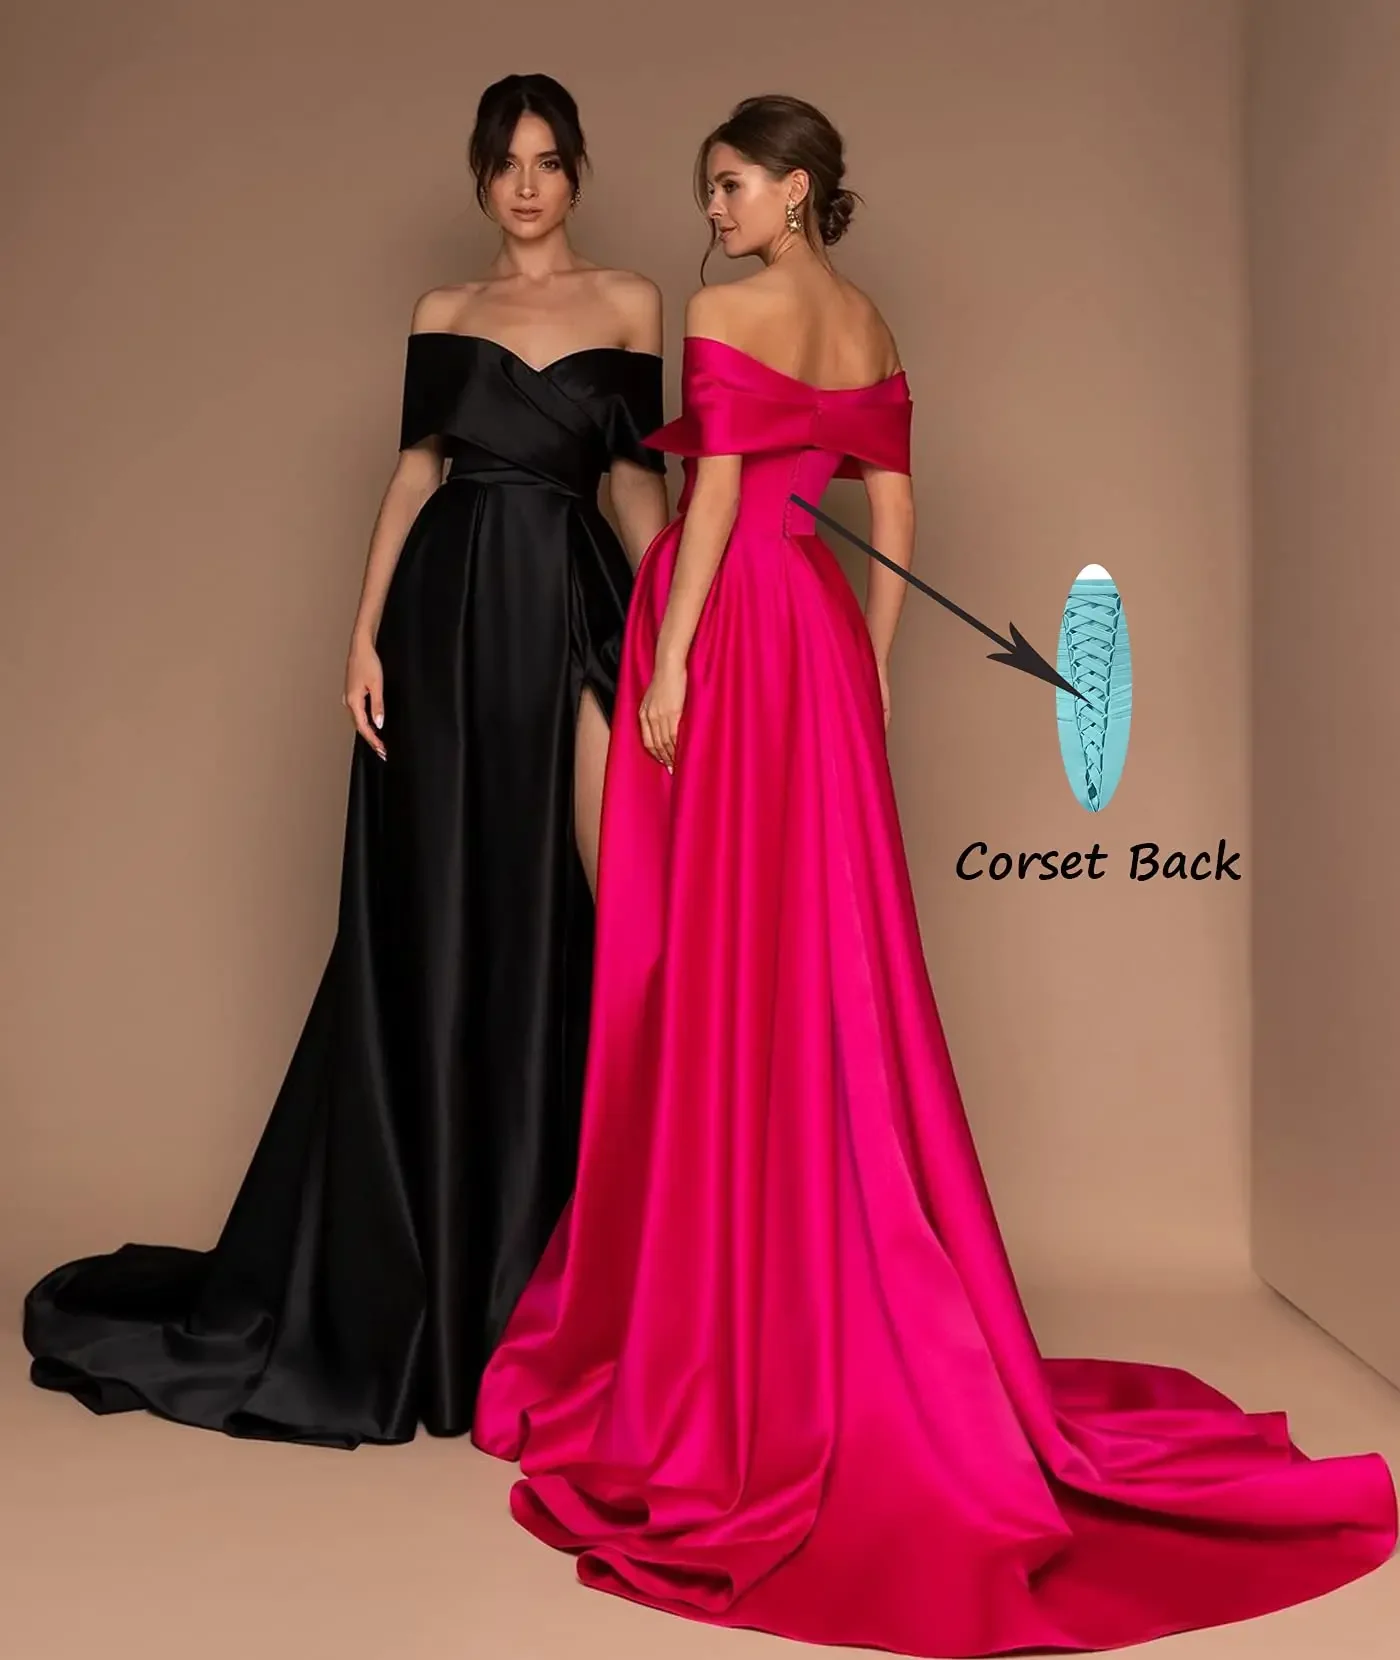 

Classic Long Off Shoulder Satin Evening Dresses With Pockets A-Line Green Pleated Side Slit Prom Dress فساتين السهرة for Women